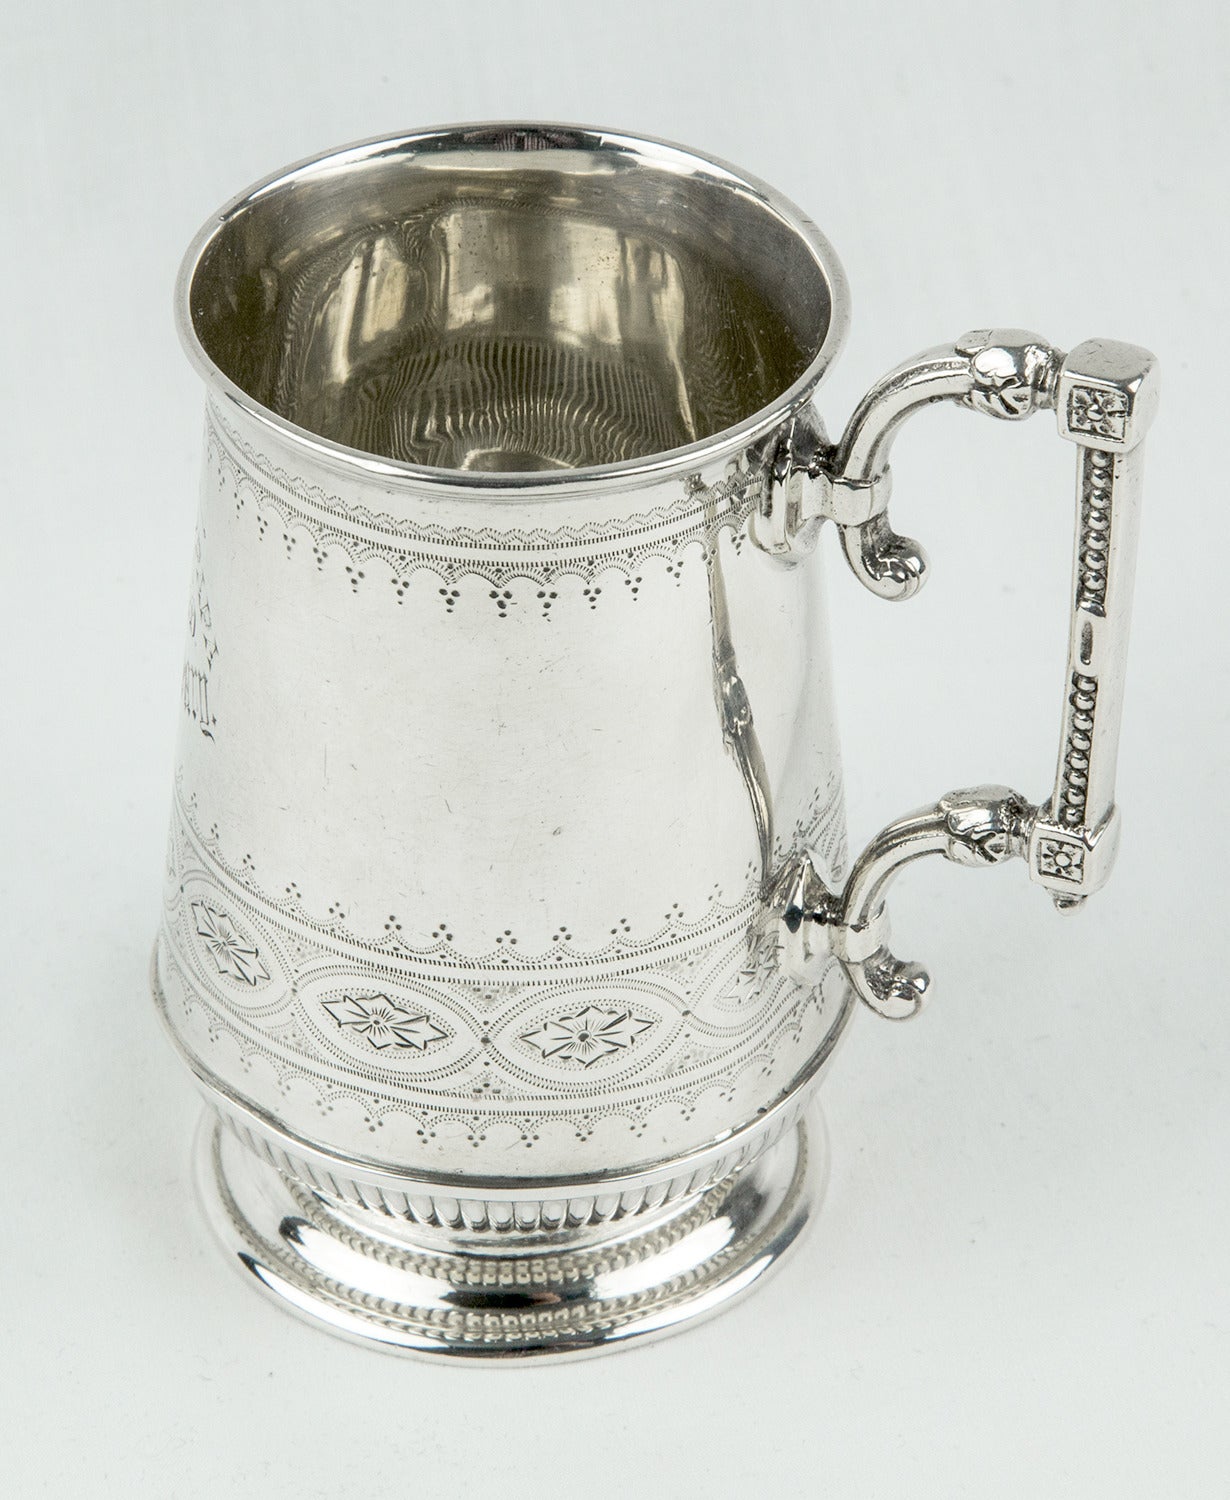 Superb Christening mug with applied, chased and engraved decoration on body and handle; fully hallmarked corresponding to: W.W. Harrison & CO. Sheffield, England, circa 1888; measuring 3.5” high and weighing approximate 149.4gm. A wonderful gift or